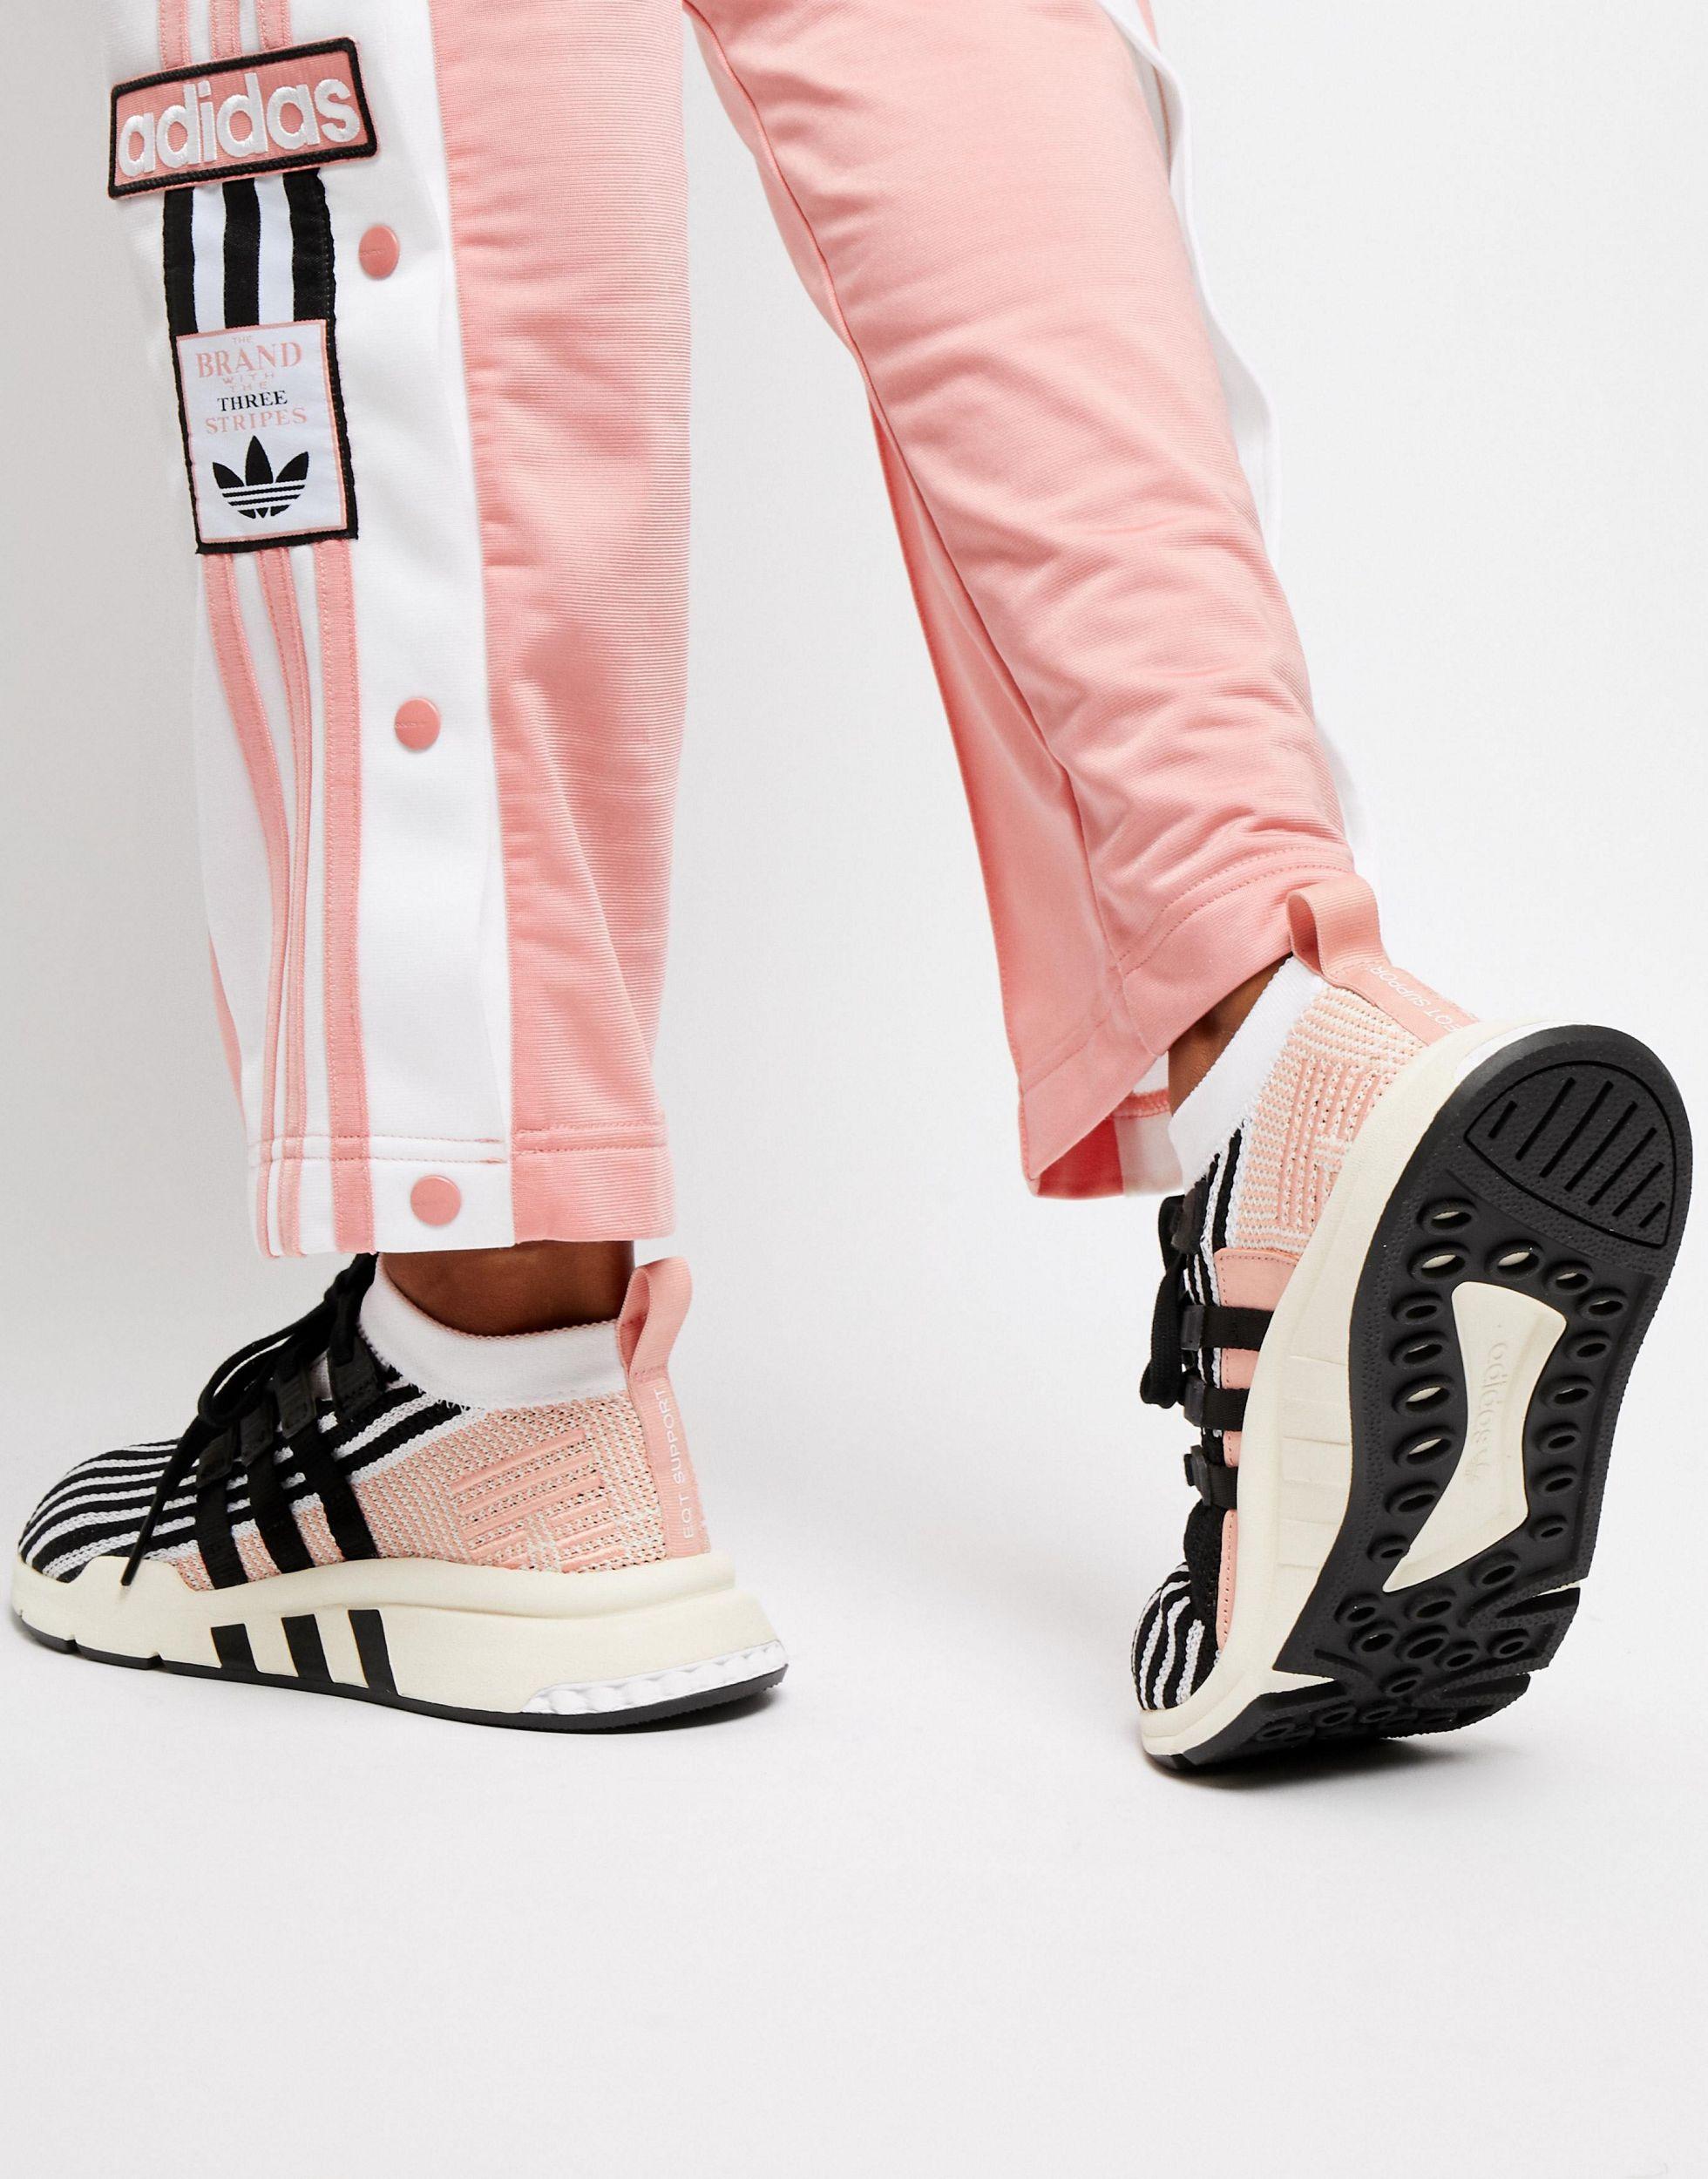 adidas Eqt Support Mid Adv Sneakers in 